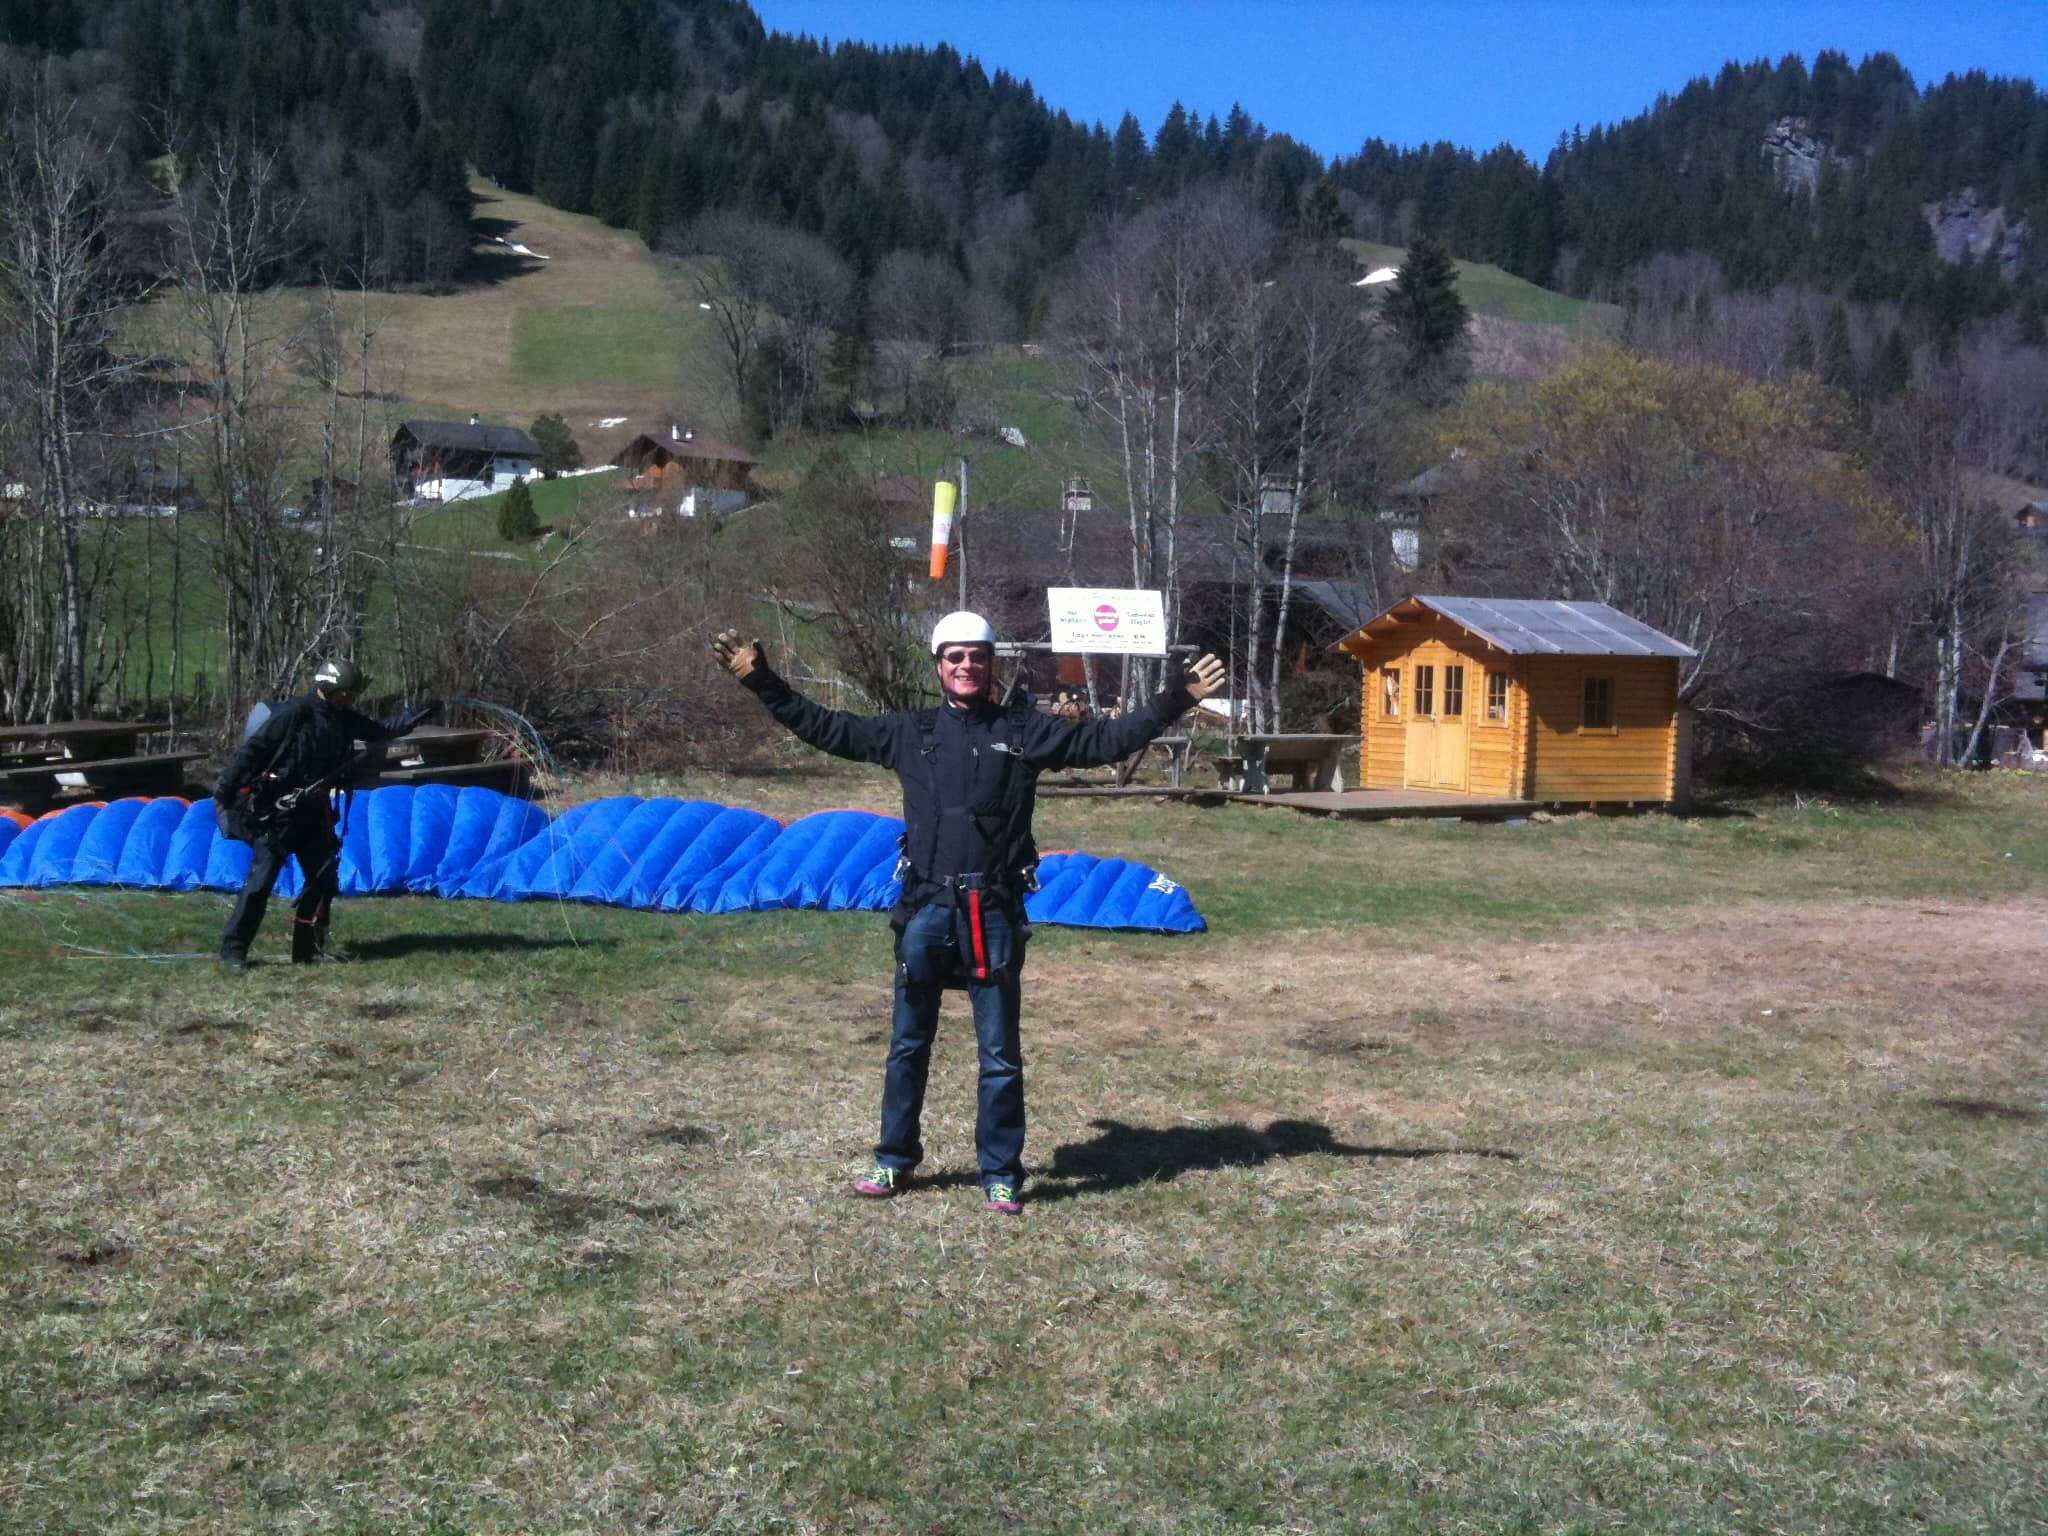 Christoph Beckermann poses for a photo after paragliding